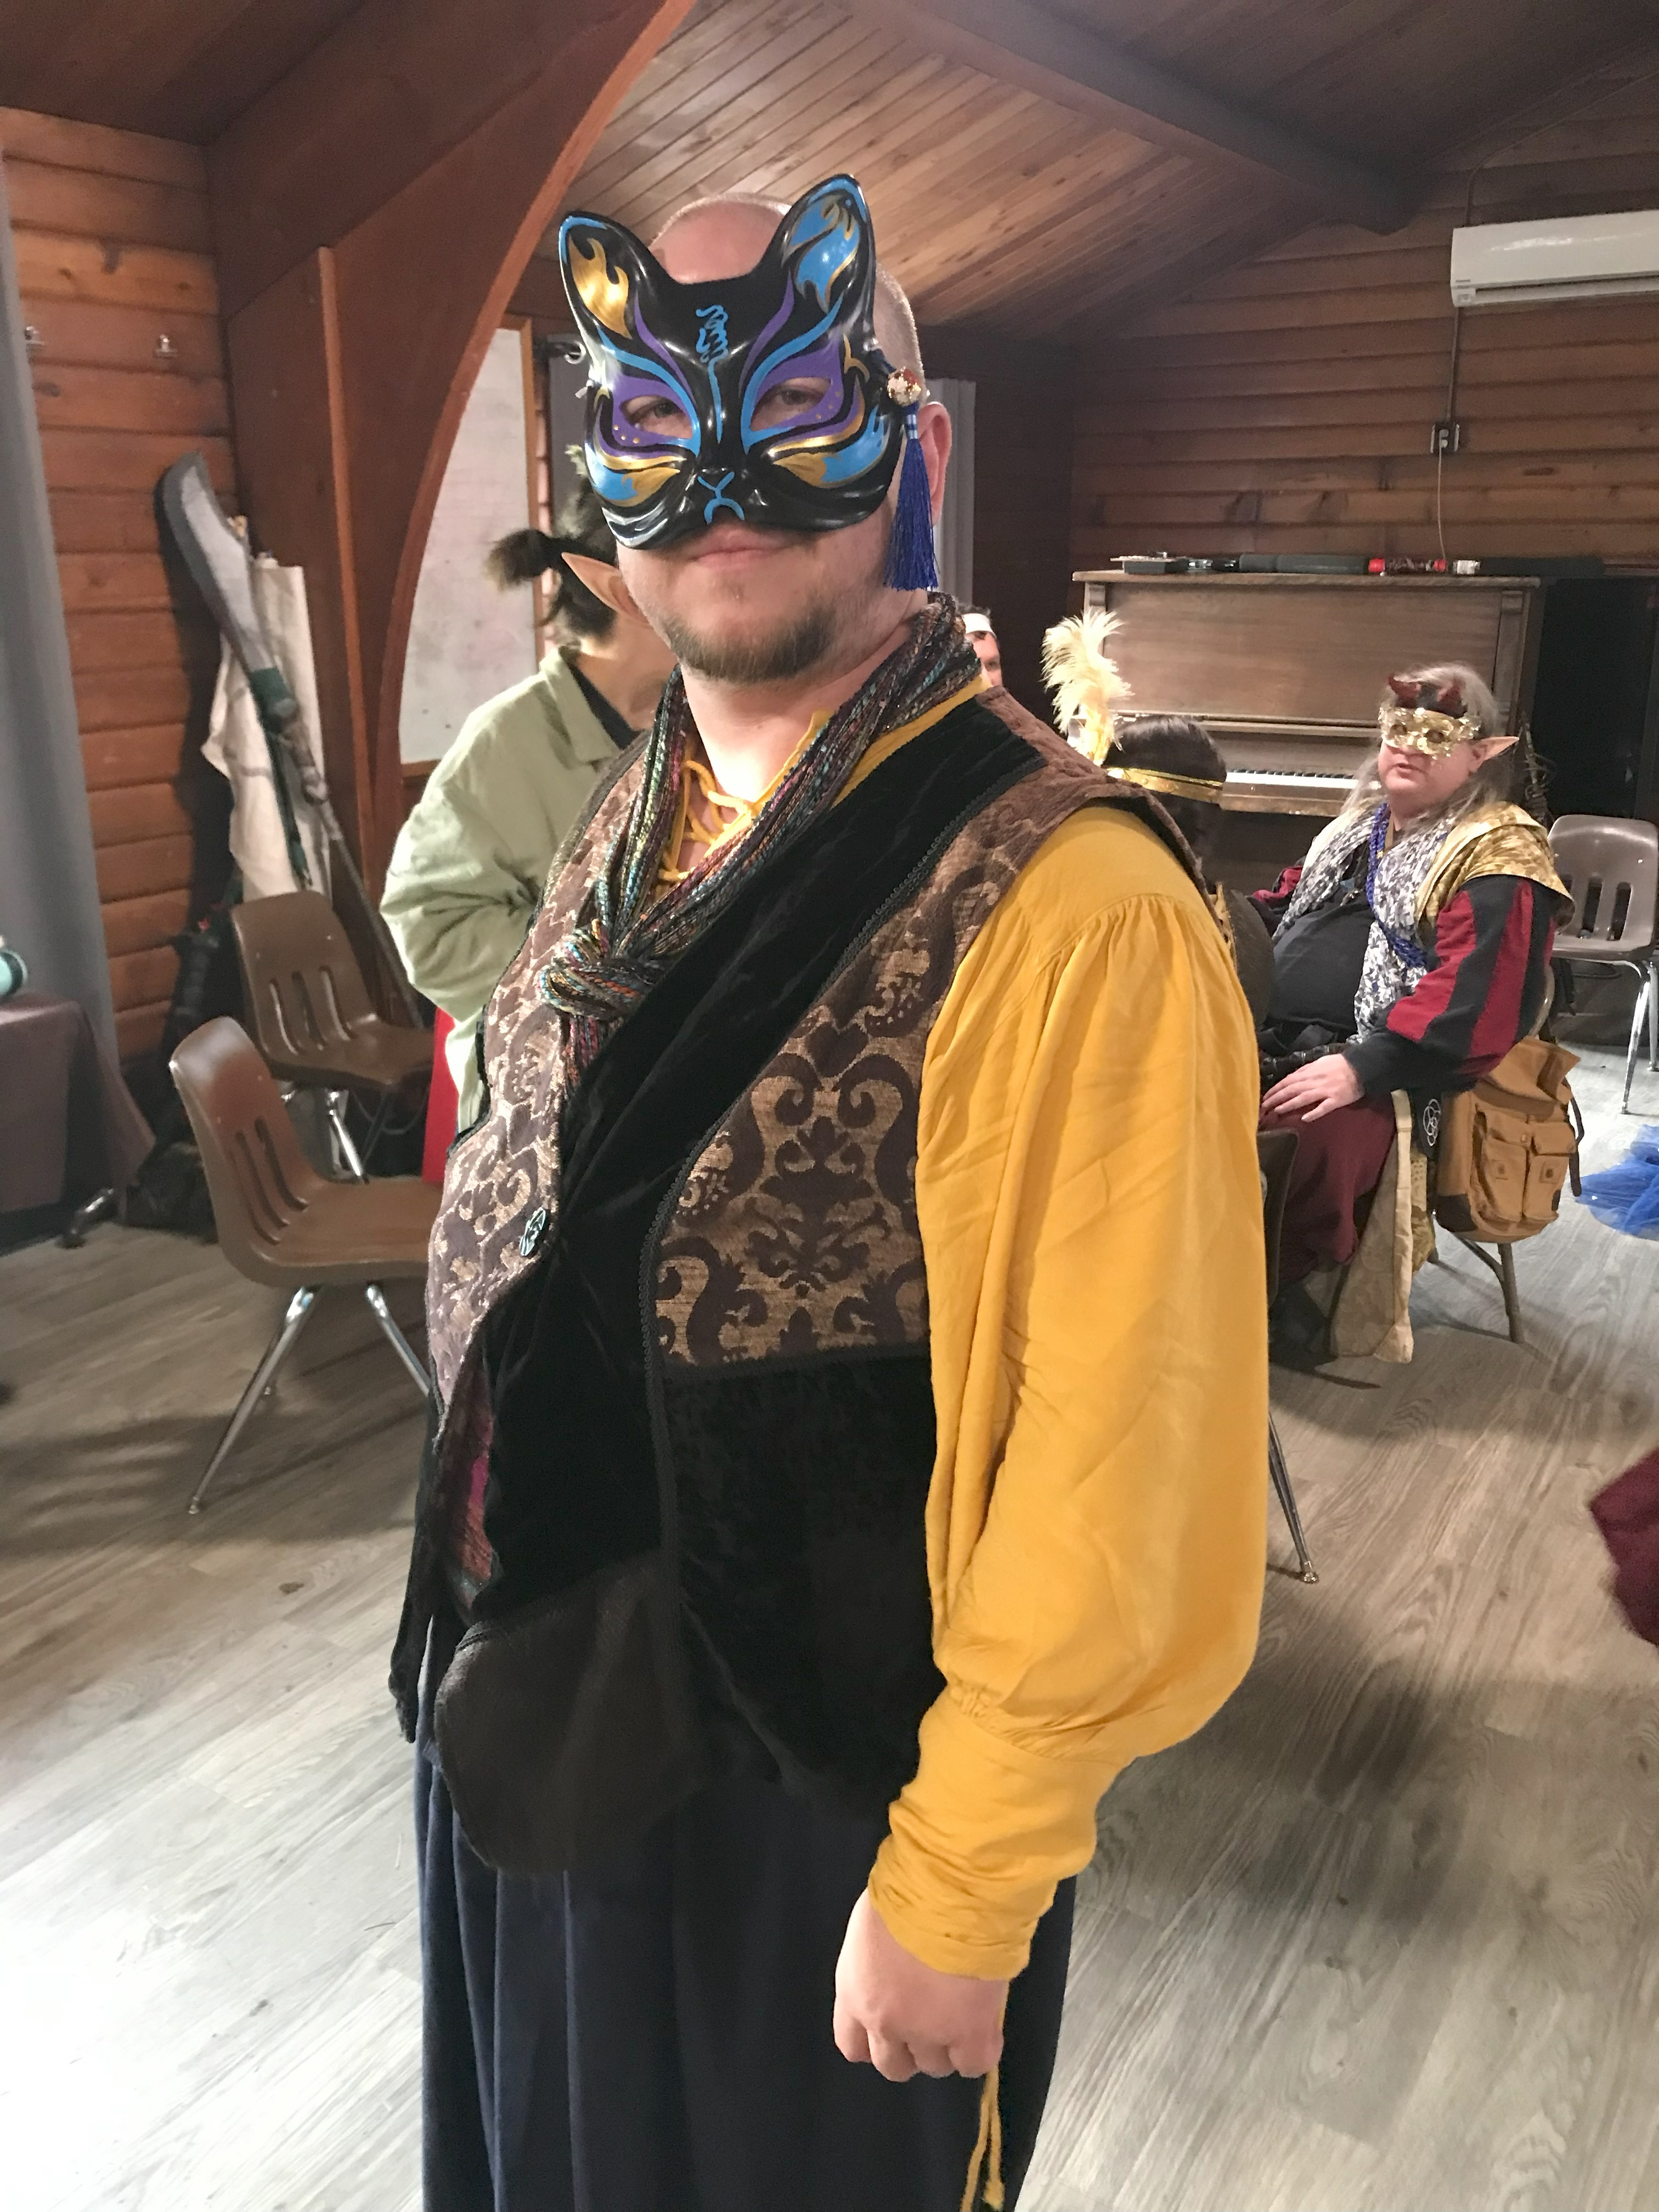 A stellarean in a mask looks at the camera, photo by Ryan W